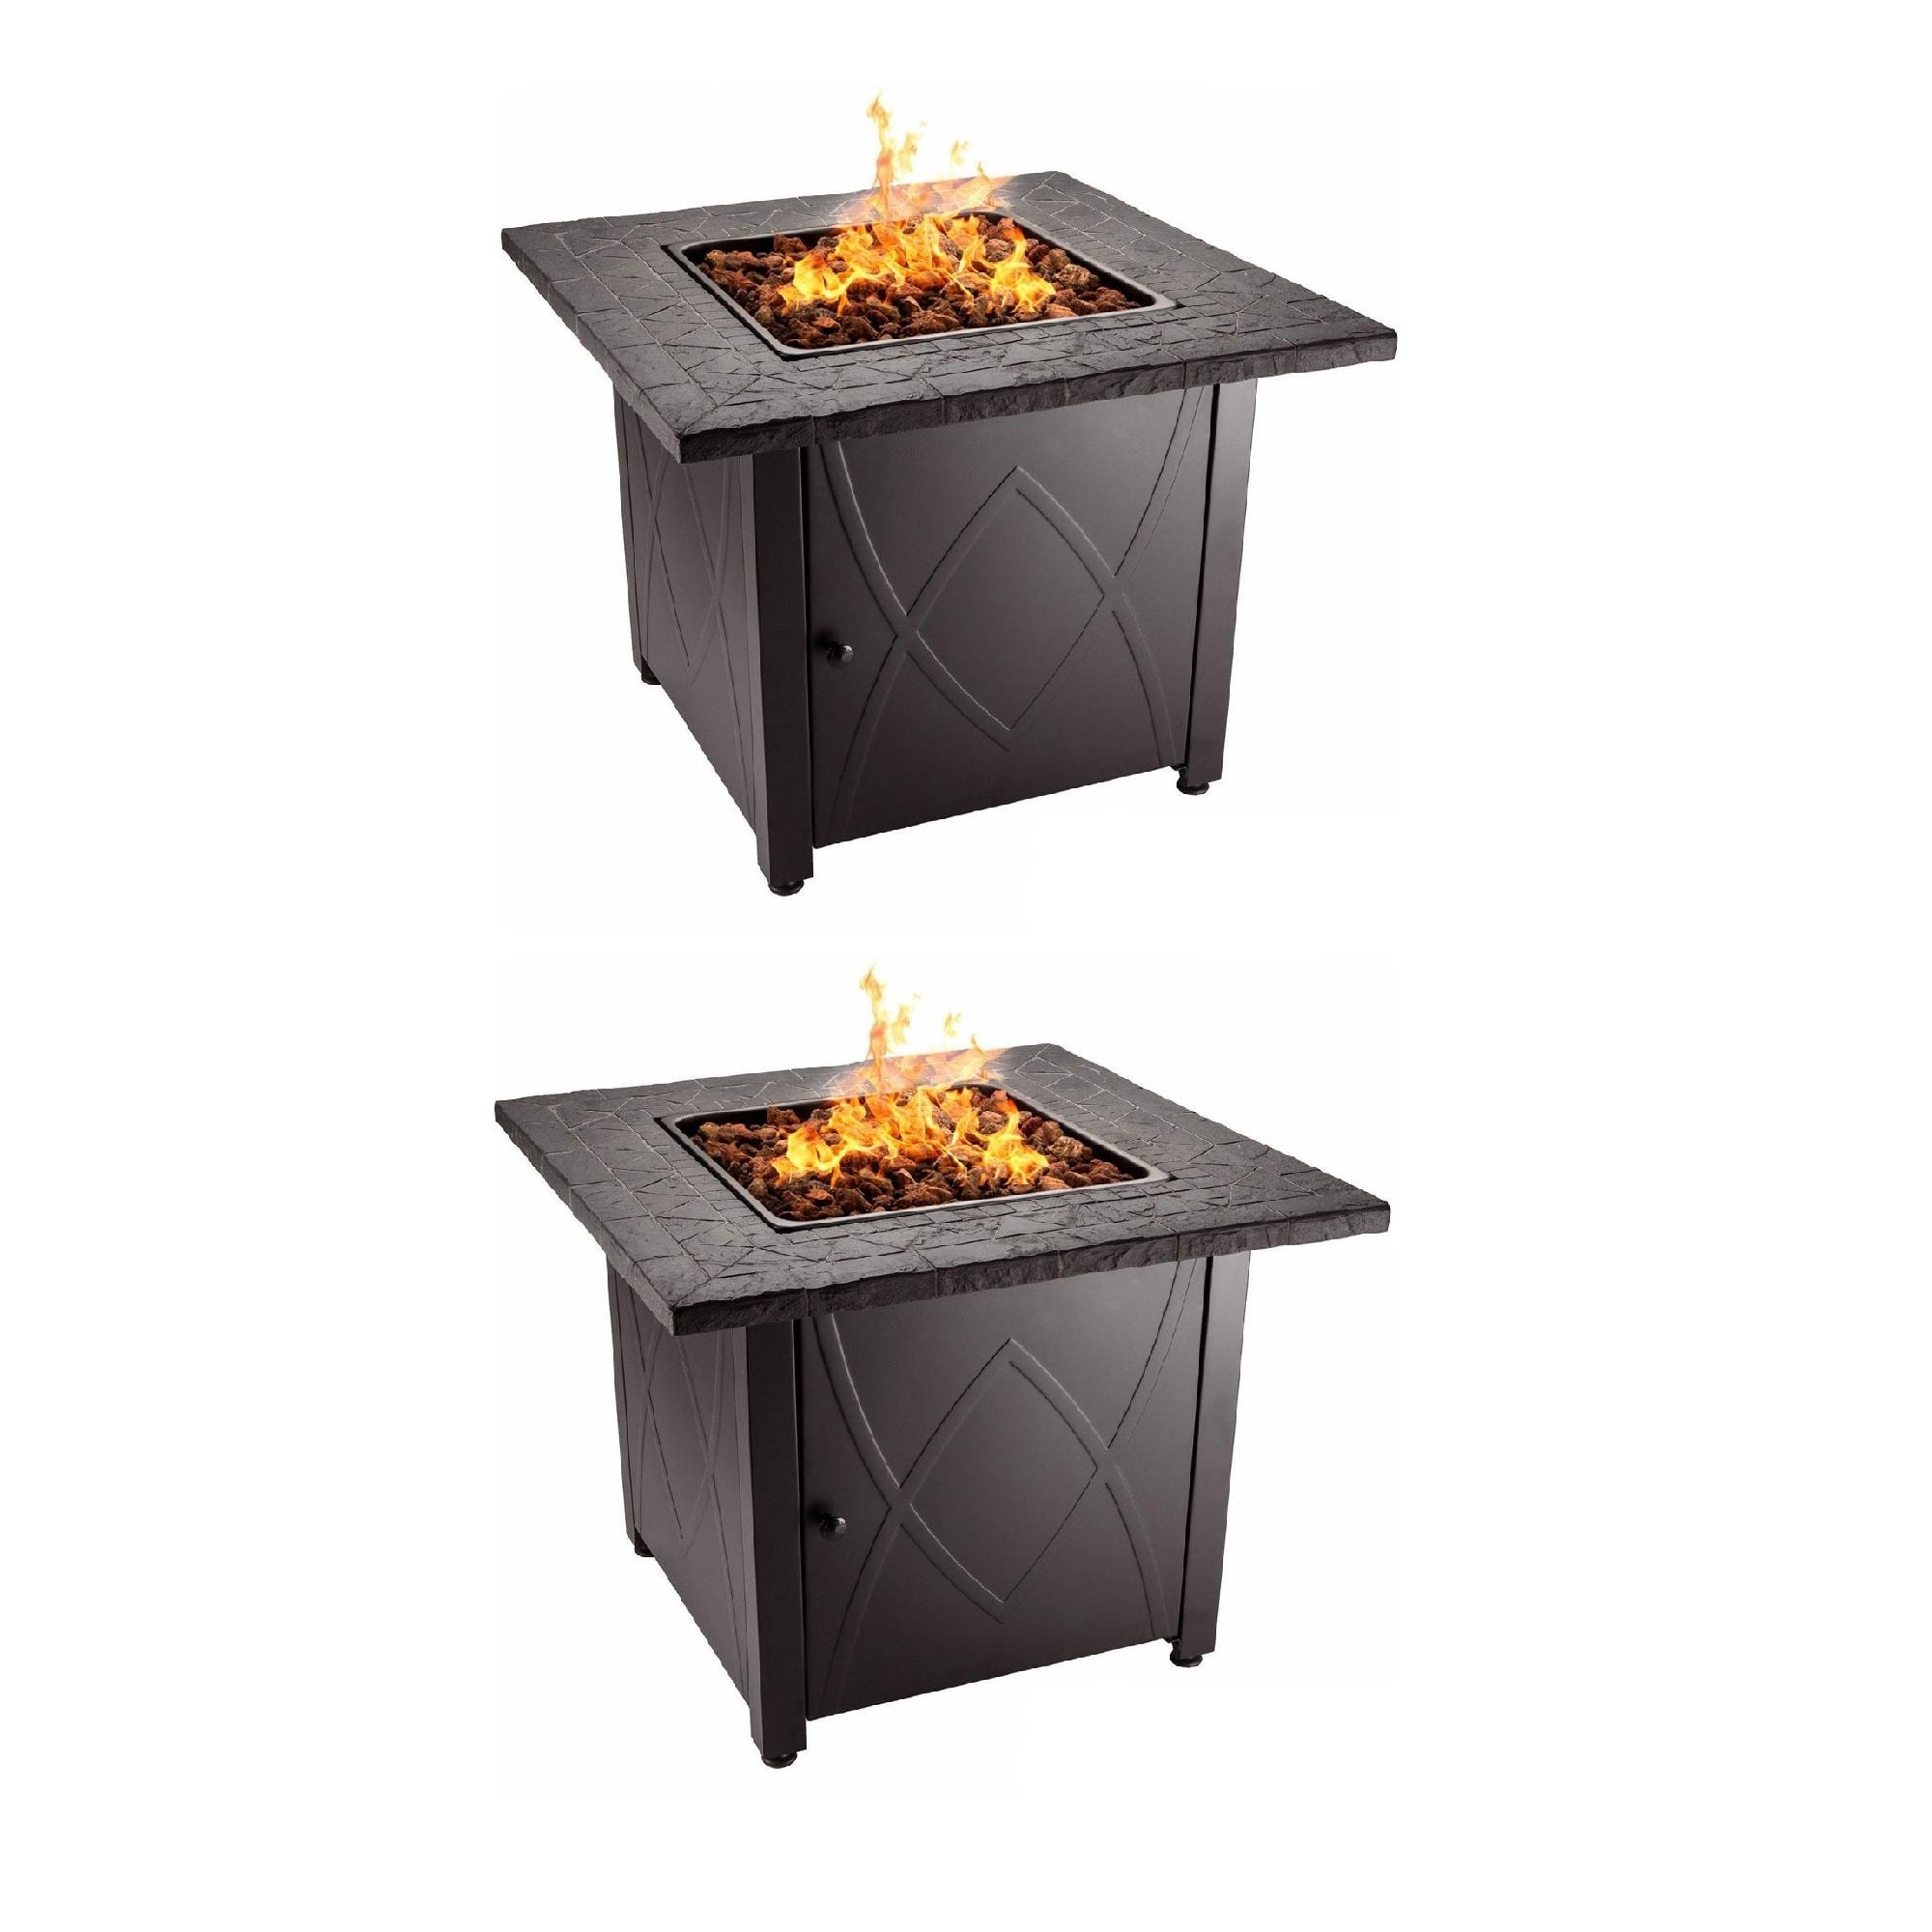 Endless Summer 30 inch Outdoor Gas Lava Rock Patio Fire Pit, Brown (2 Pack)